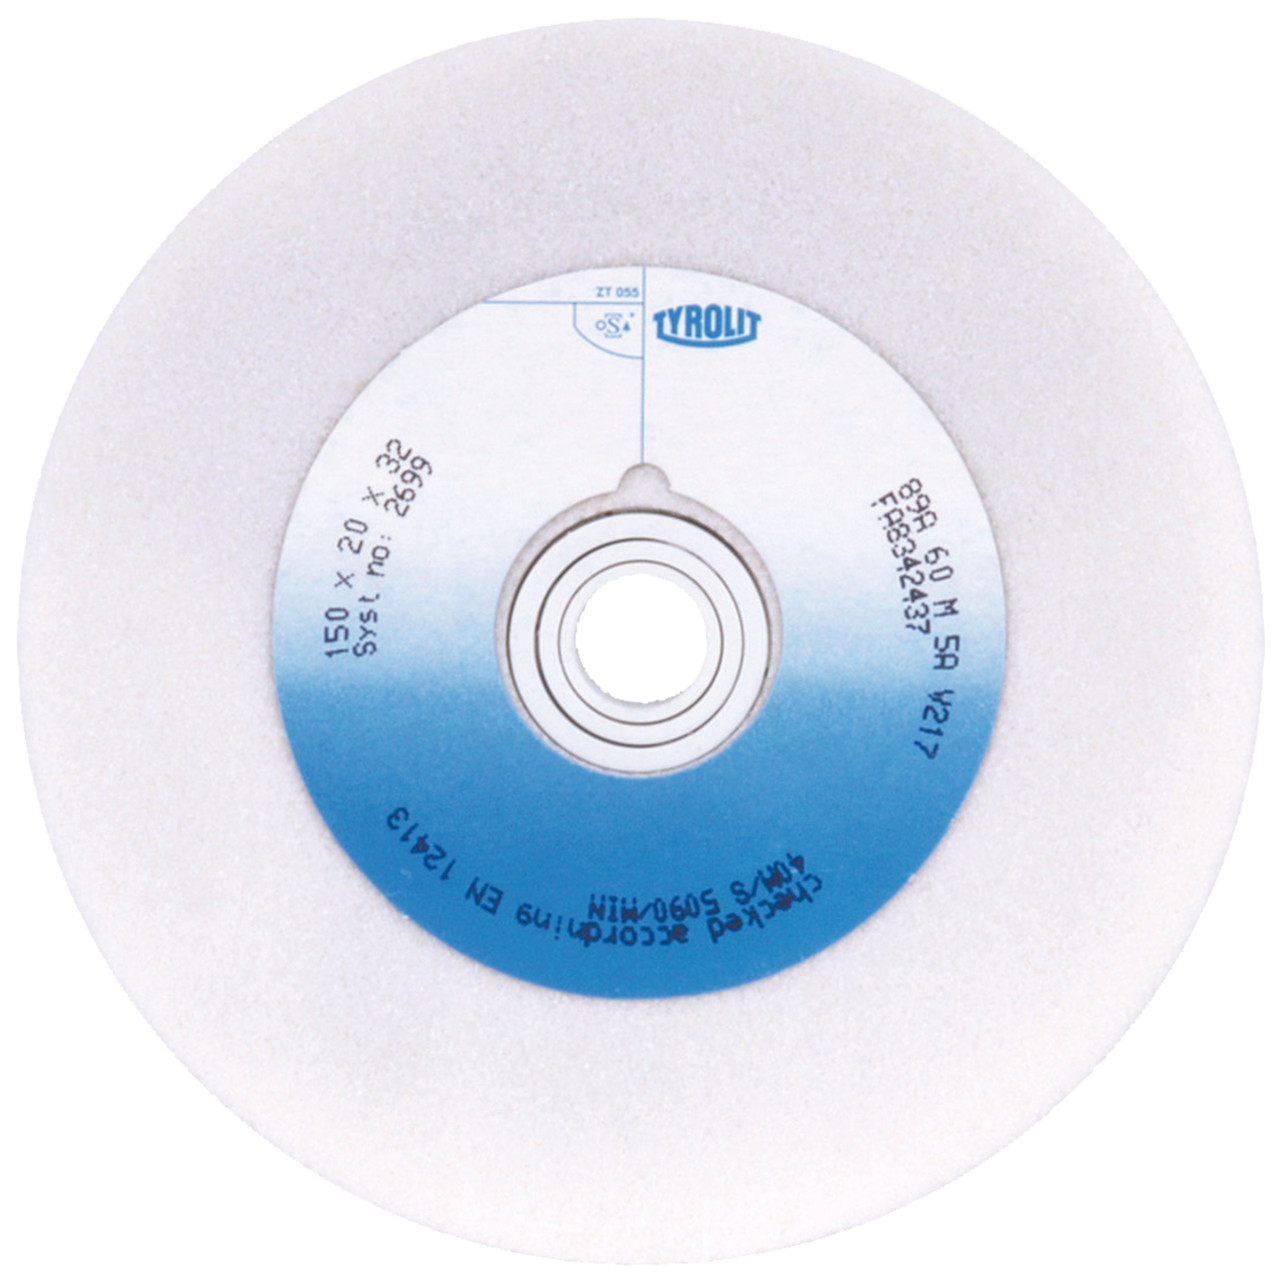 Tyrolit Conventional ceramic grinding discs DxDxH 200x32x51 For high-alloy steels and HSS, shape: 1, Art. 99864